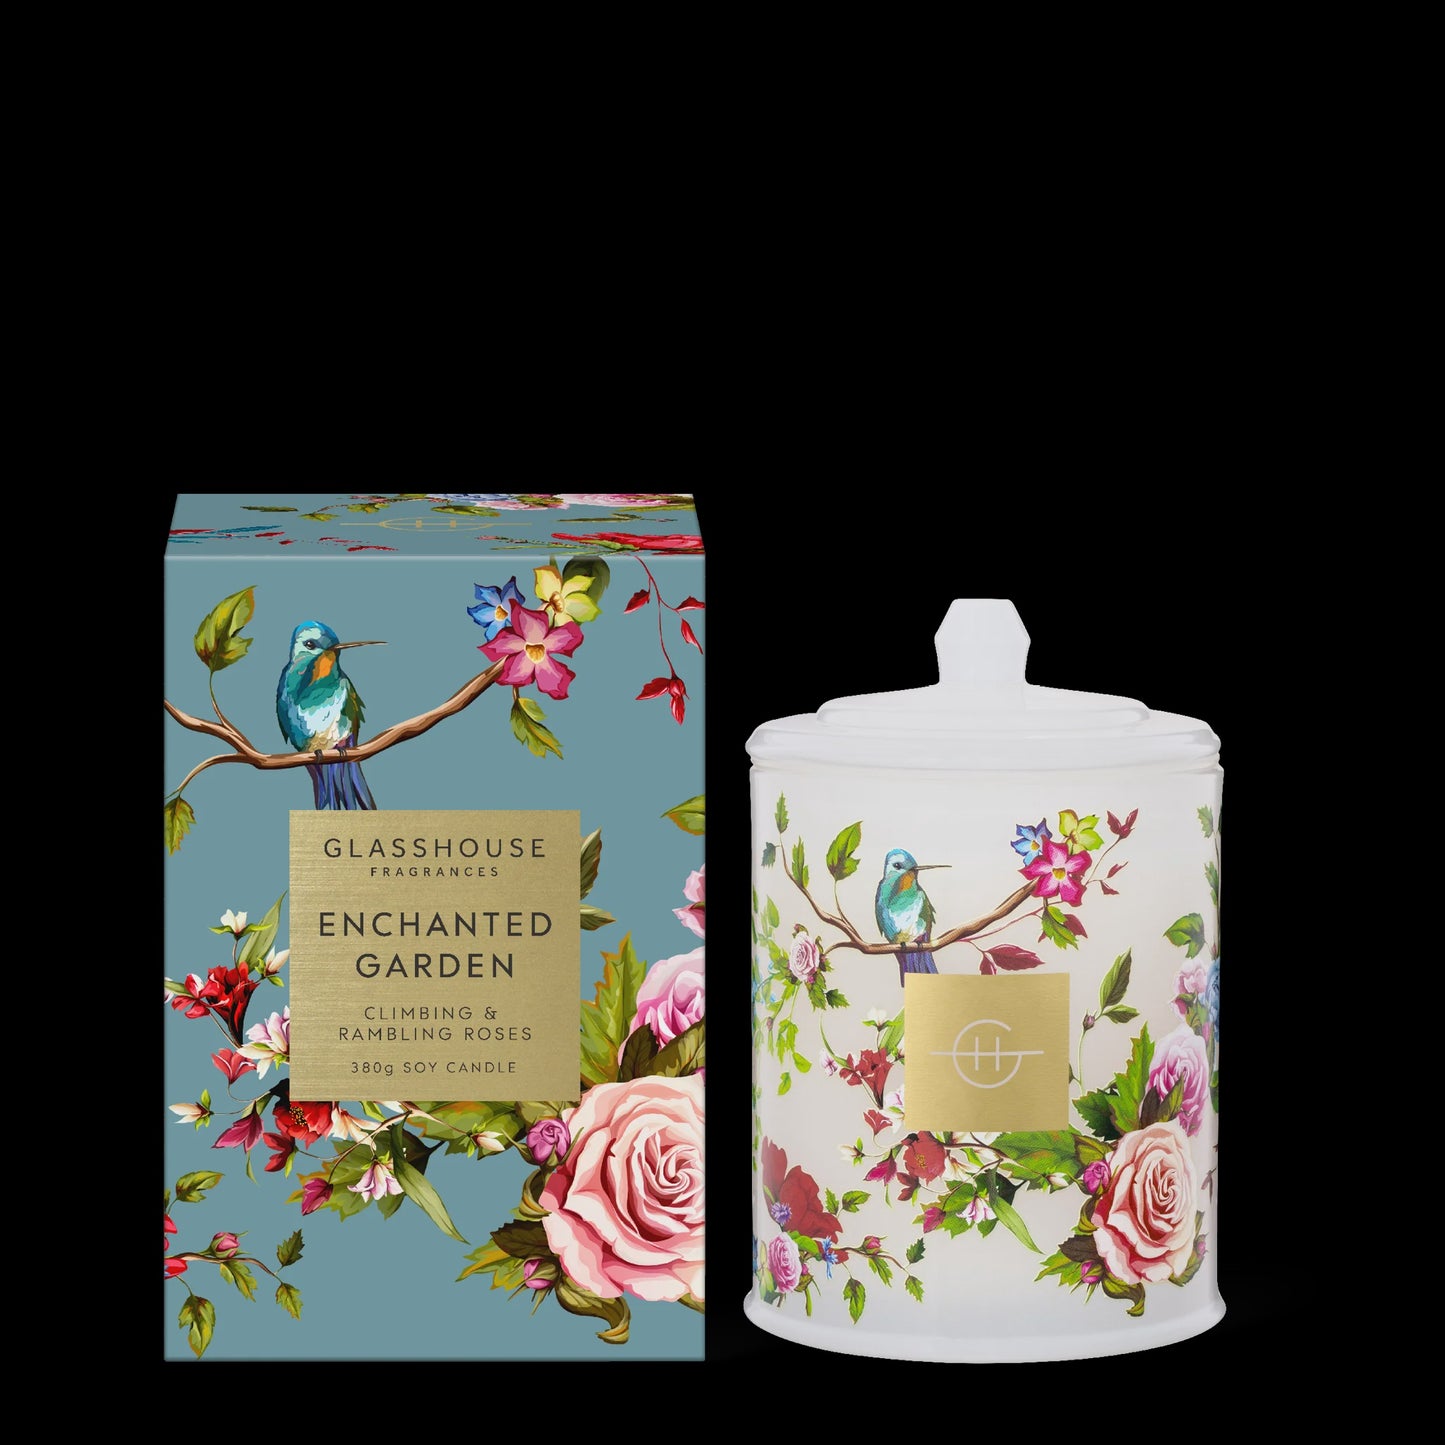 ENCHANTED GARDEN CANDLE 380G - GLASSHOUSE - candles - Stomp Shoes Darwin